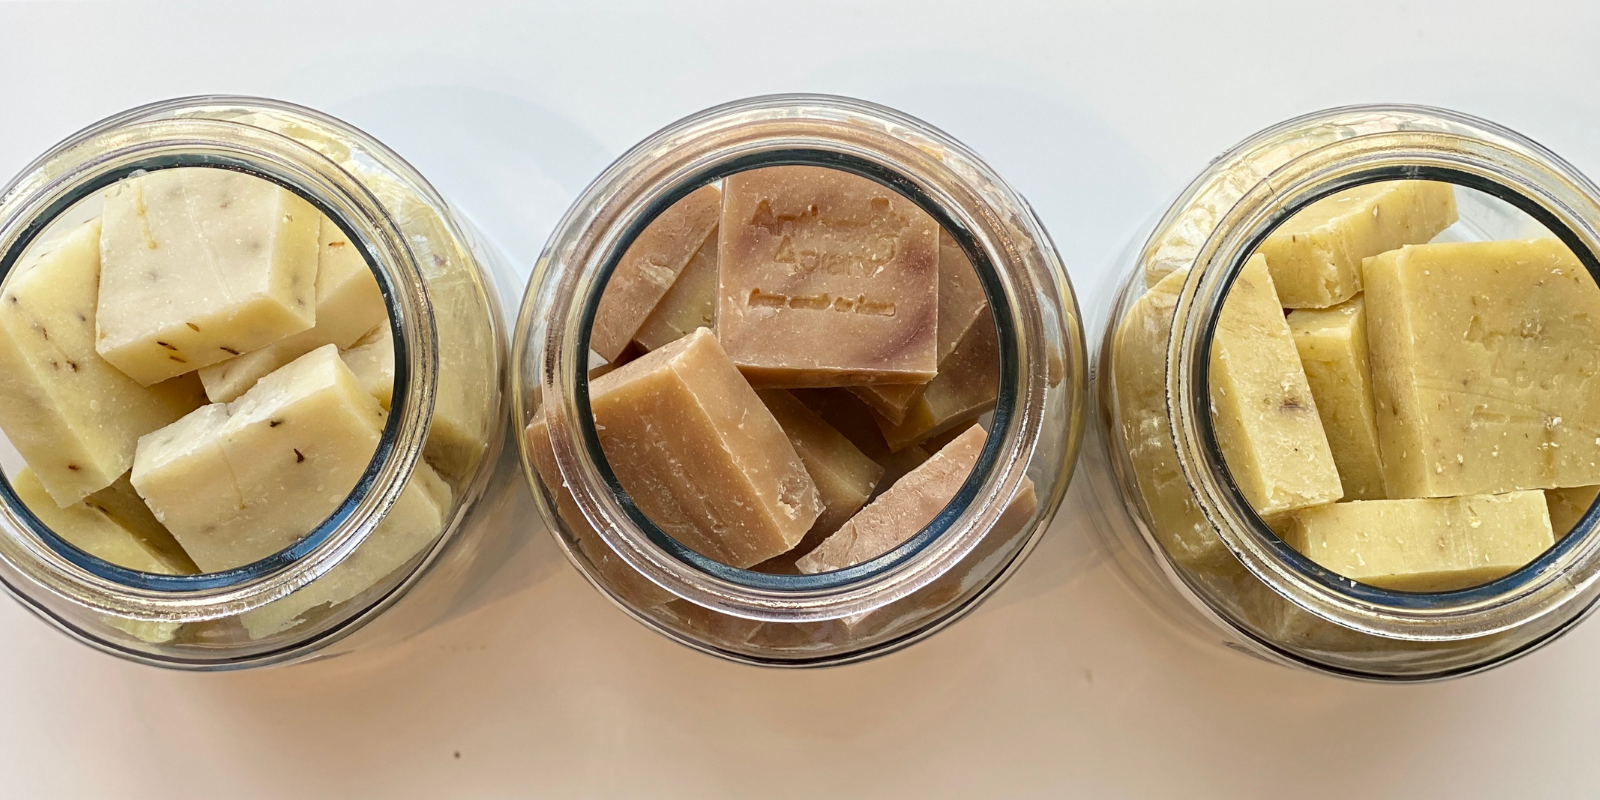 Anther and Apiary Soaps